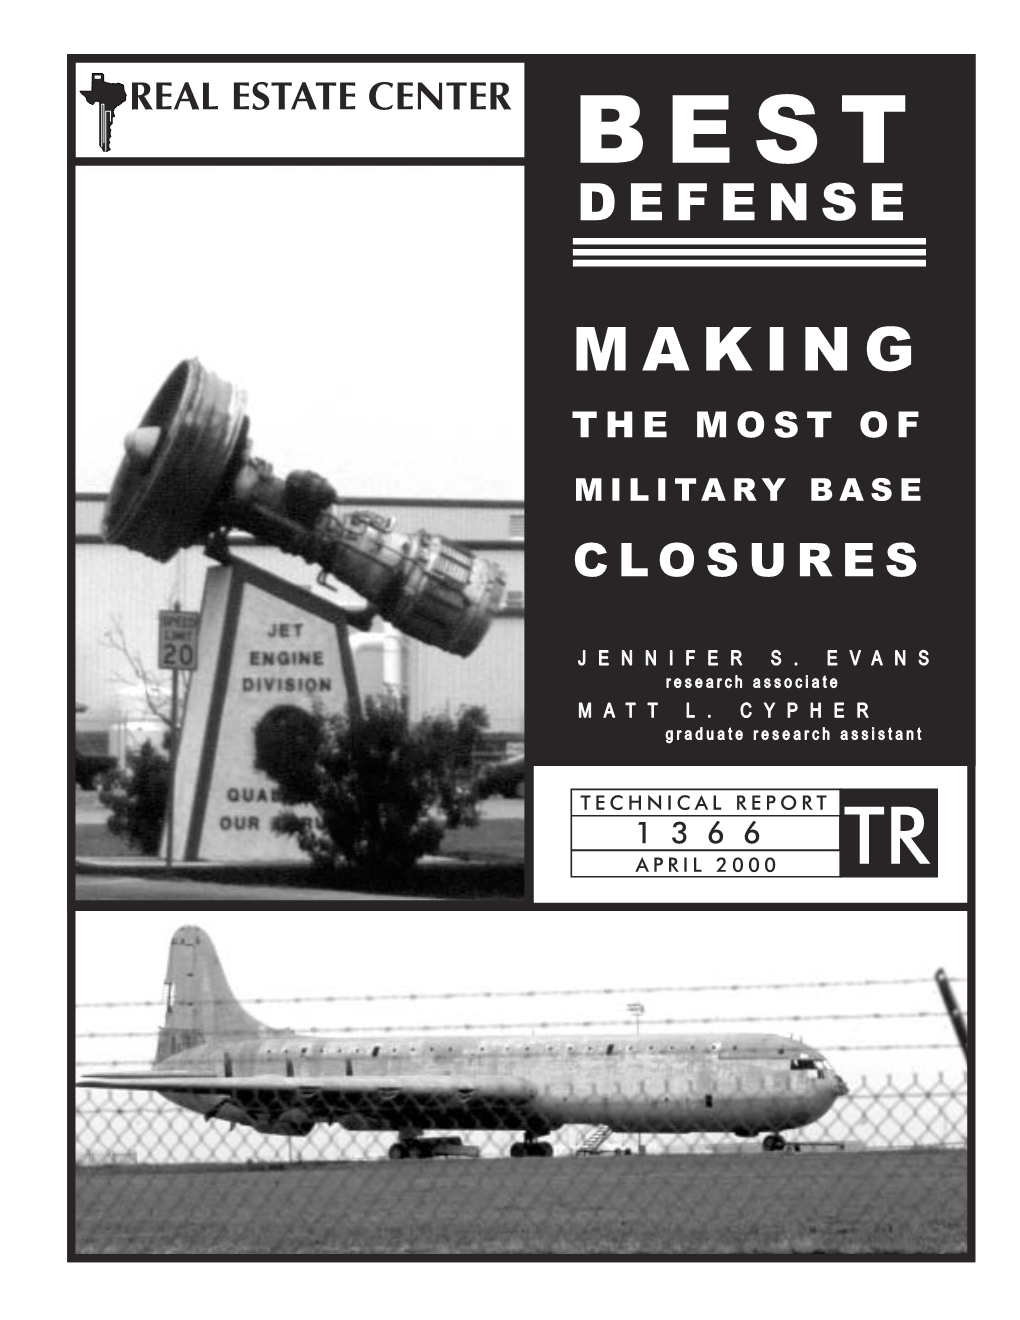 Best Defense: Making the Most of Military Base Closures